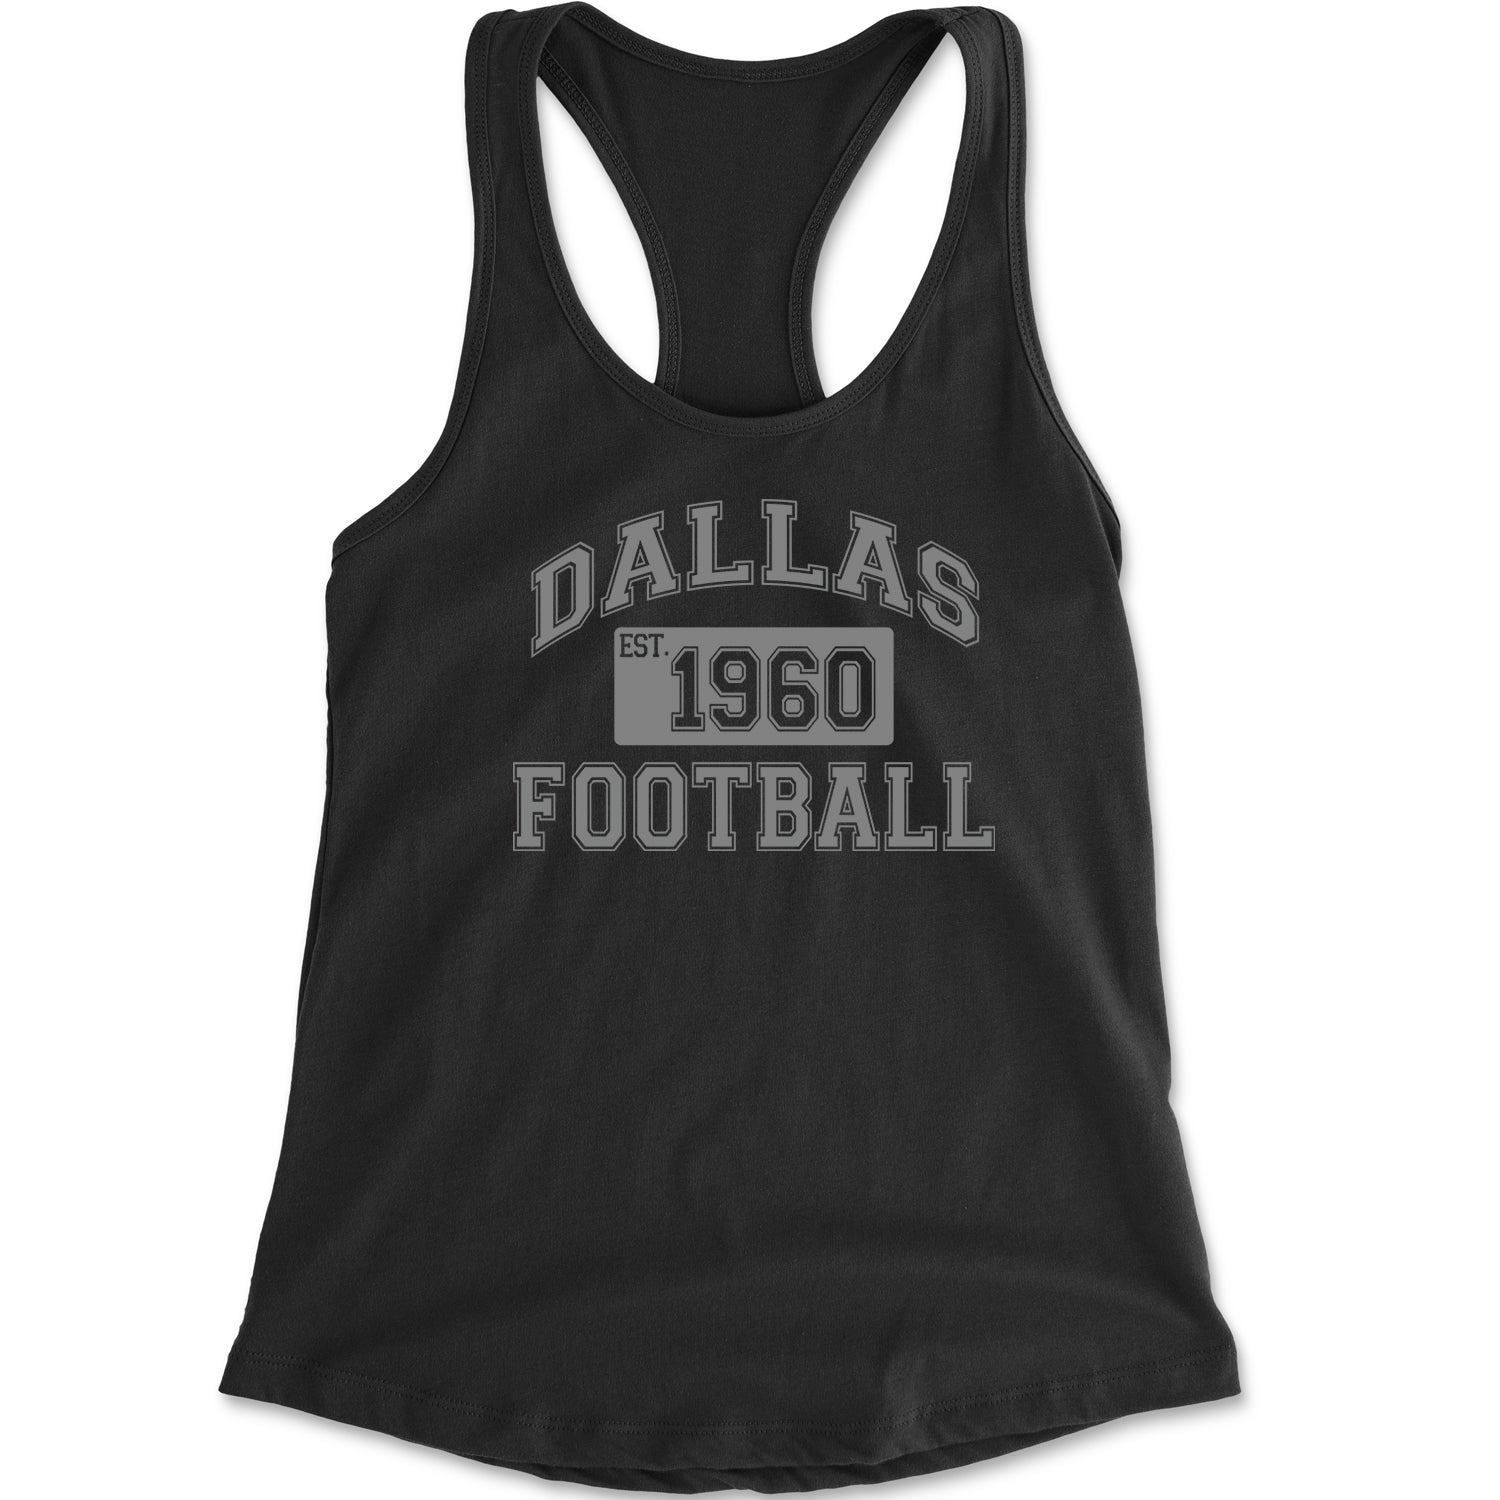 Dallas Football Established 1960 Racerback Tank Top for Women boys, dem by Expression Tees